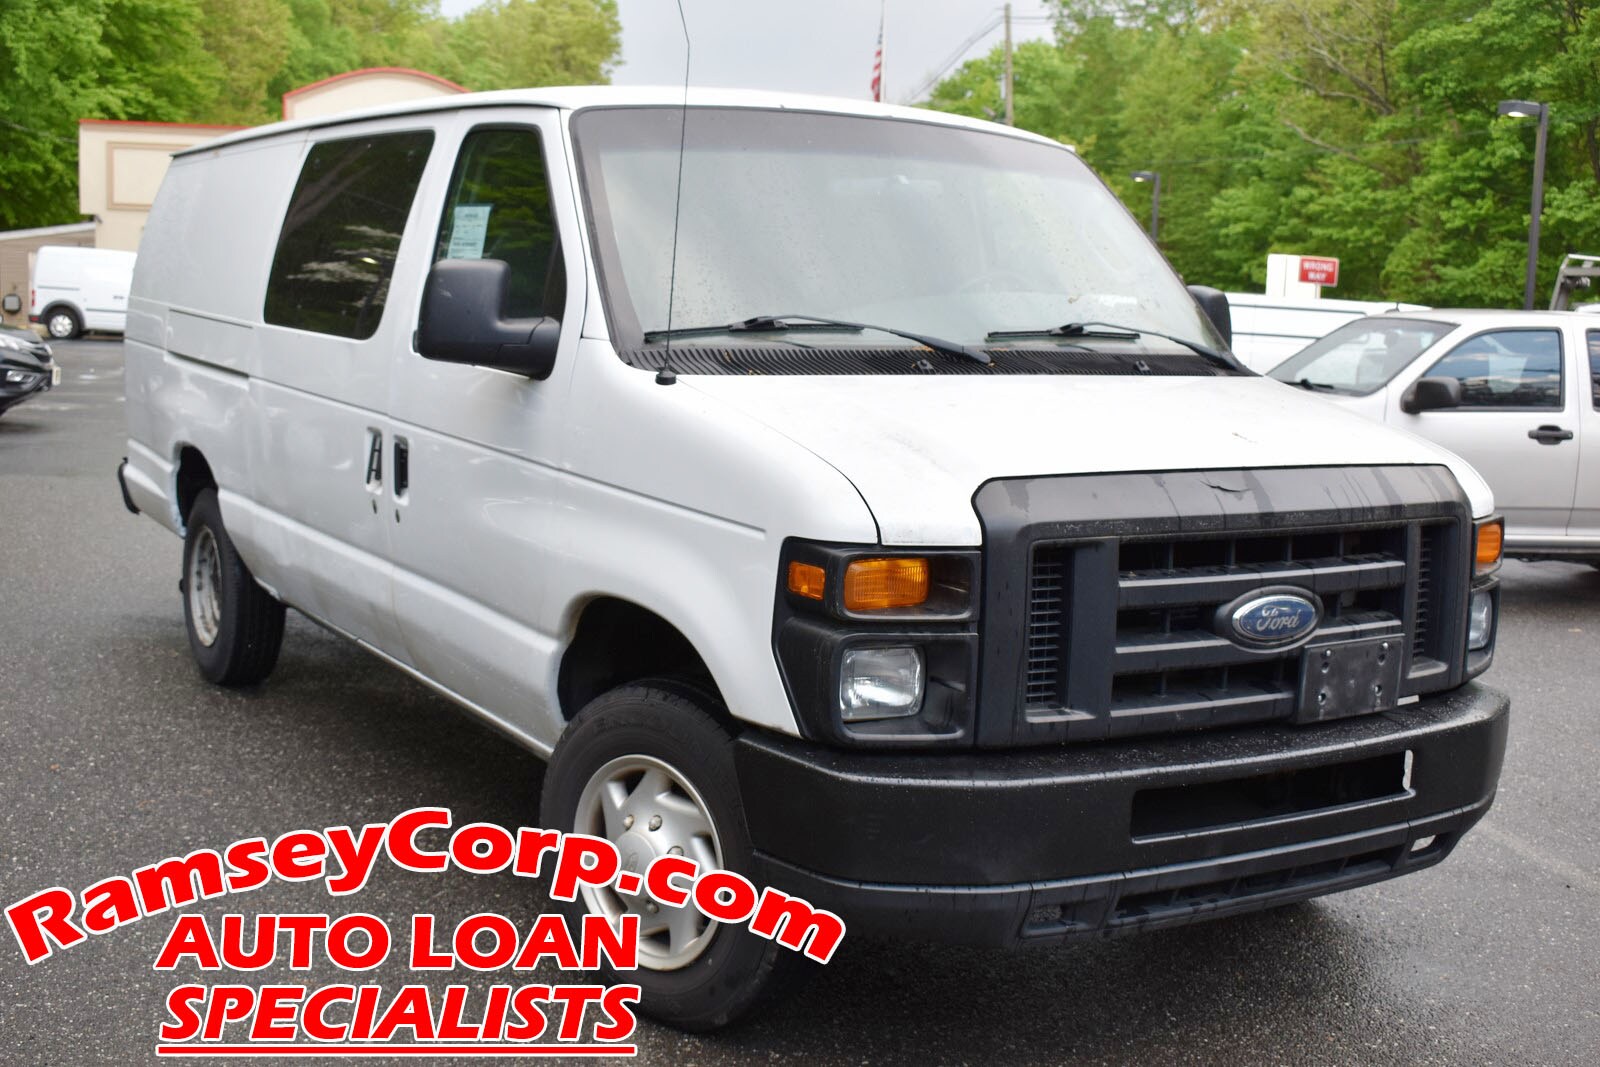 VIN: 1FTNS24W08DB10769 - Used 2008 Ford E-250 For Sale at Ramsey Corp.